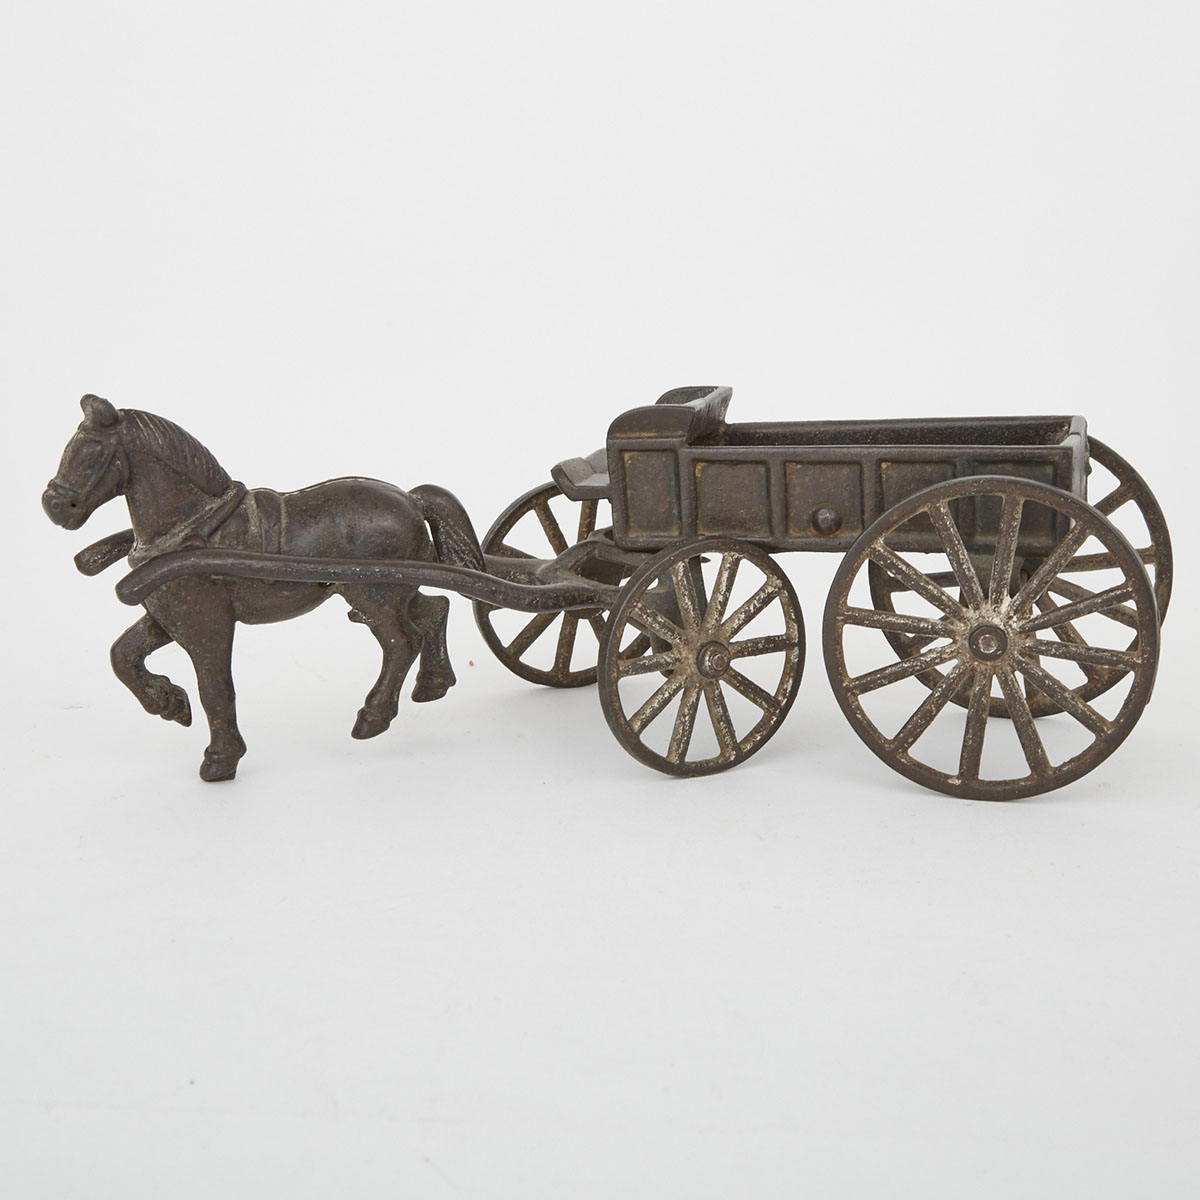 Canadian Beaverton Toy Co. No. 27 Cast Iron Horse and Wagon, early 20th century